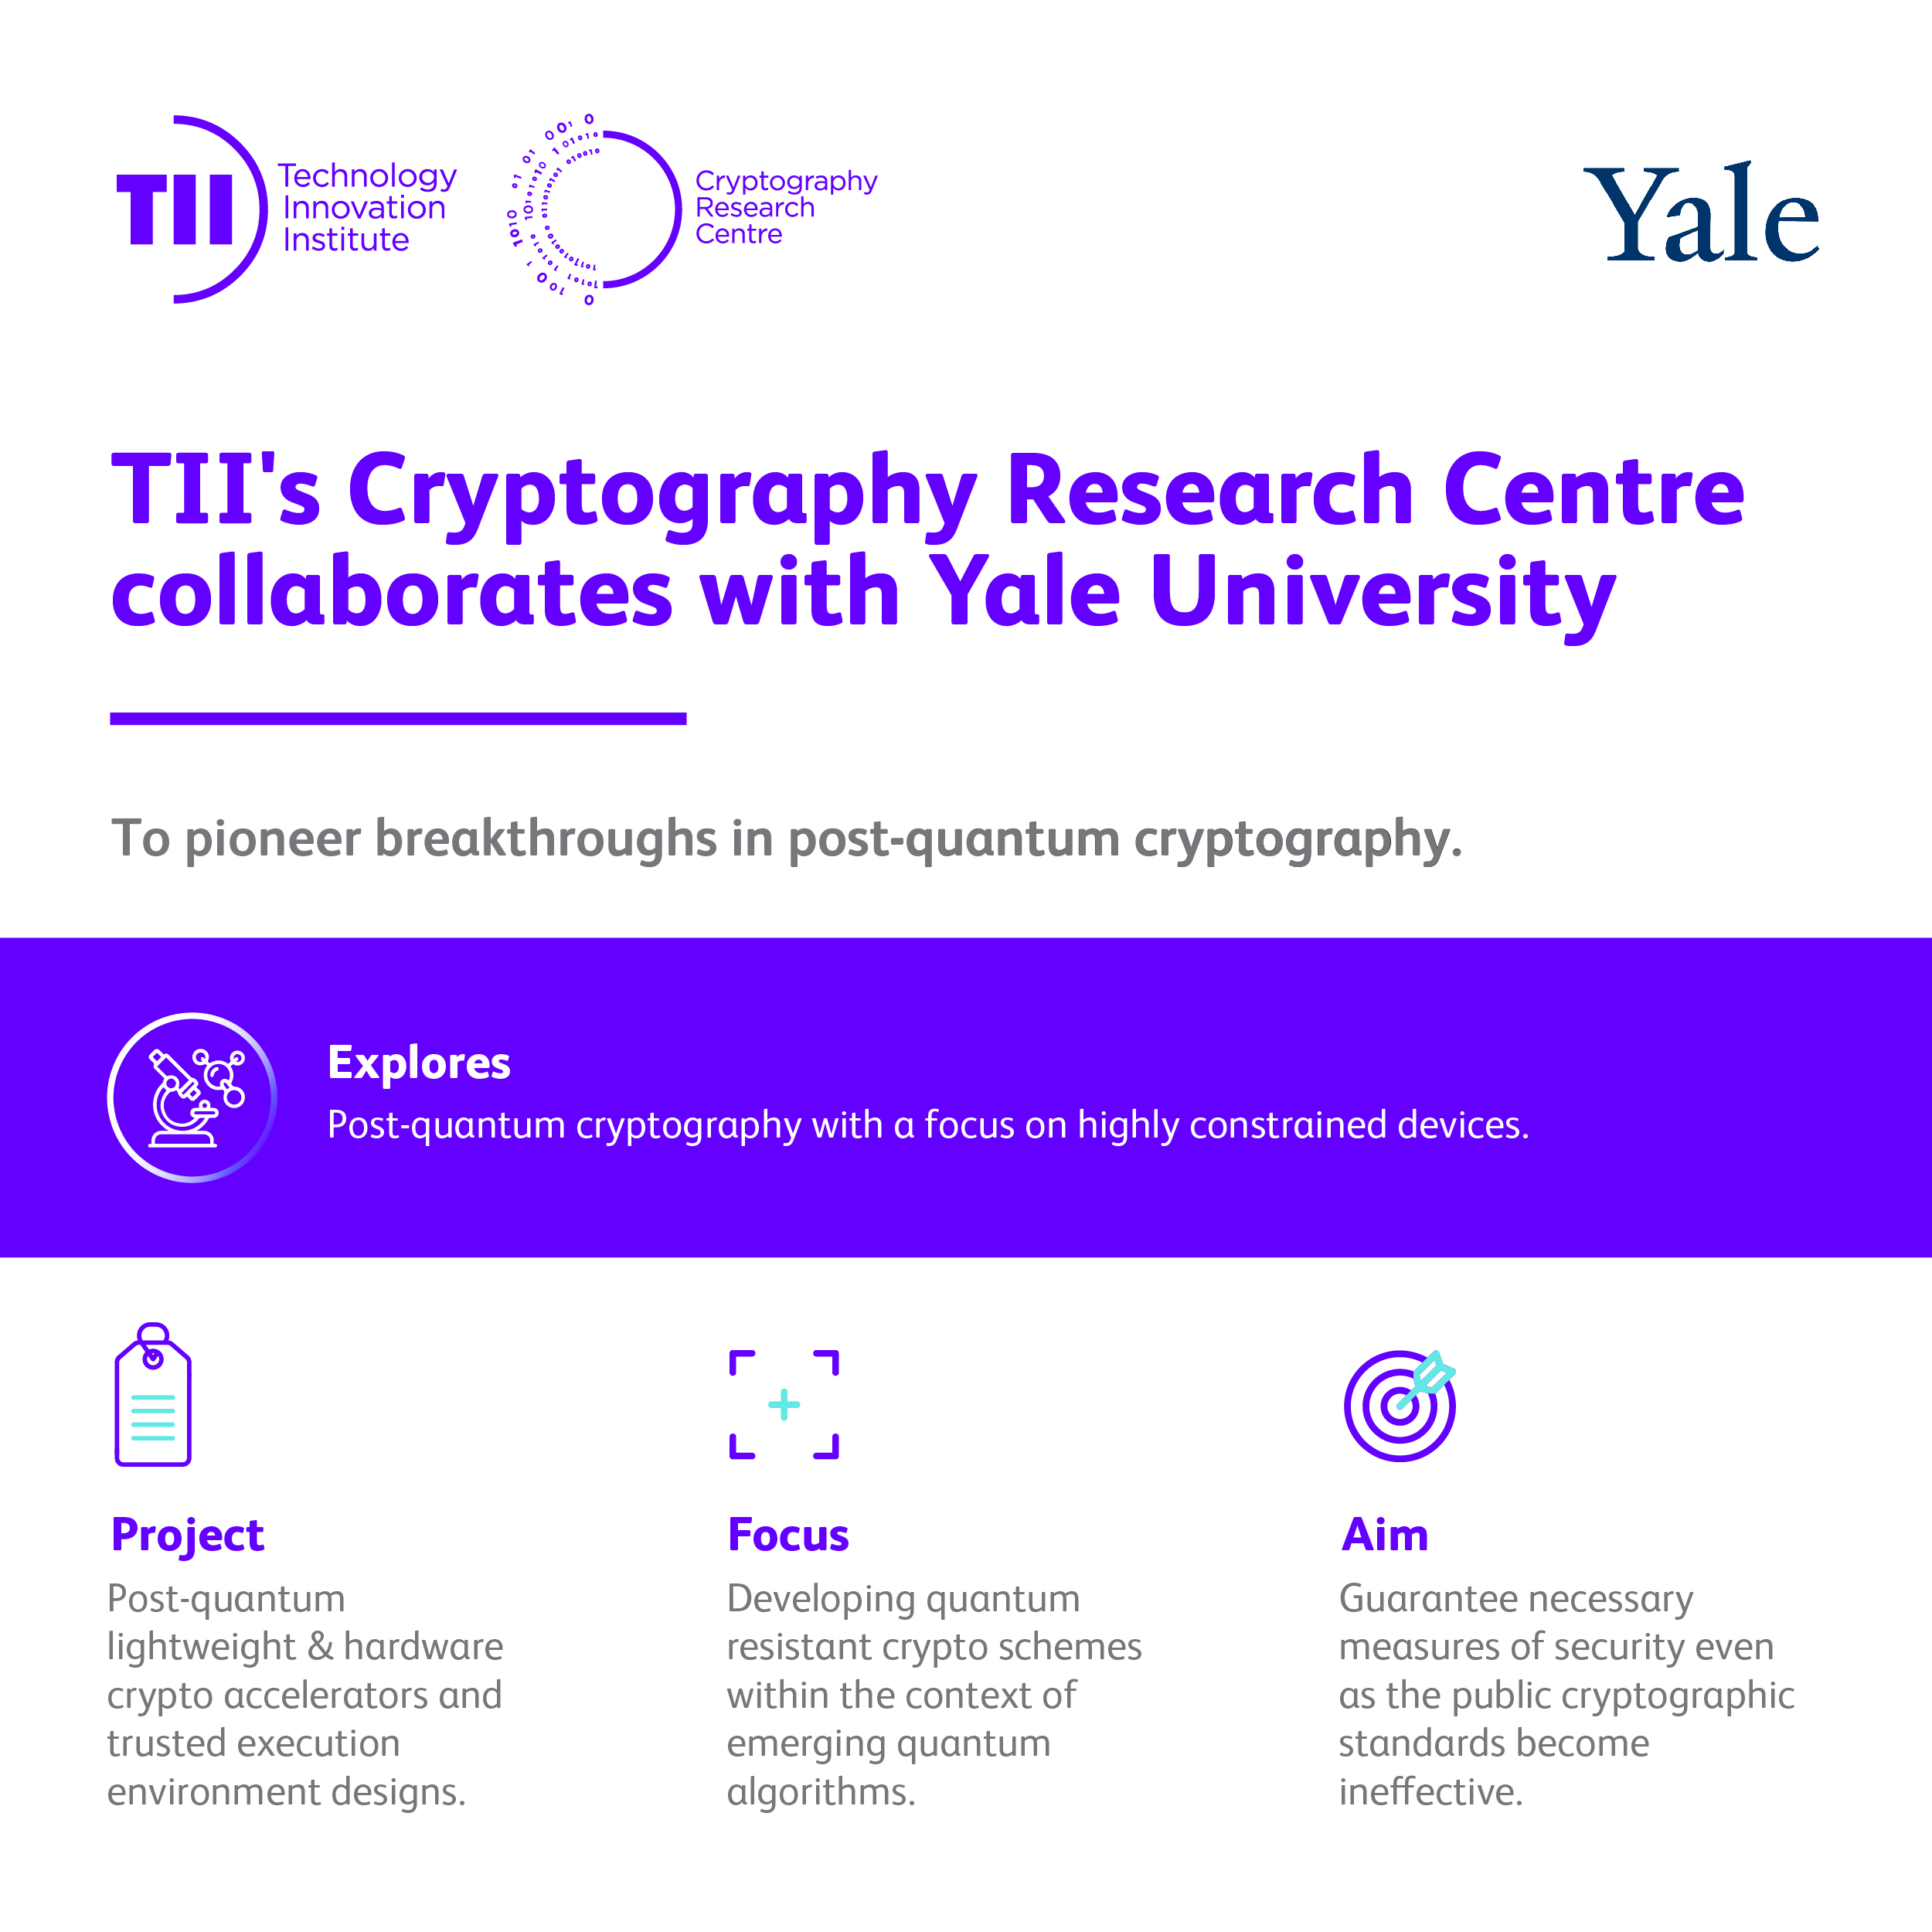 Technology Innovation Institute’s Cryptography Research Centre In Abu Dhabi Collaborates With Yale University